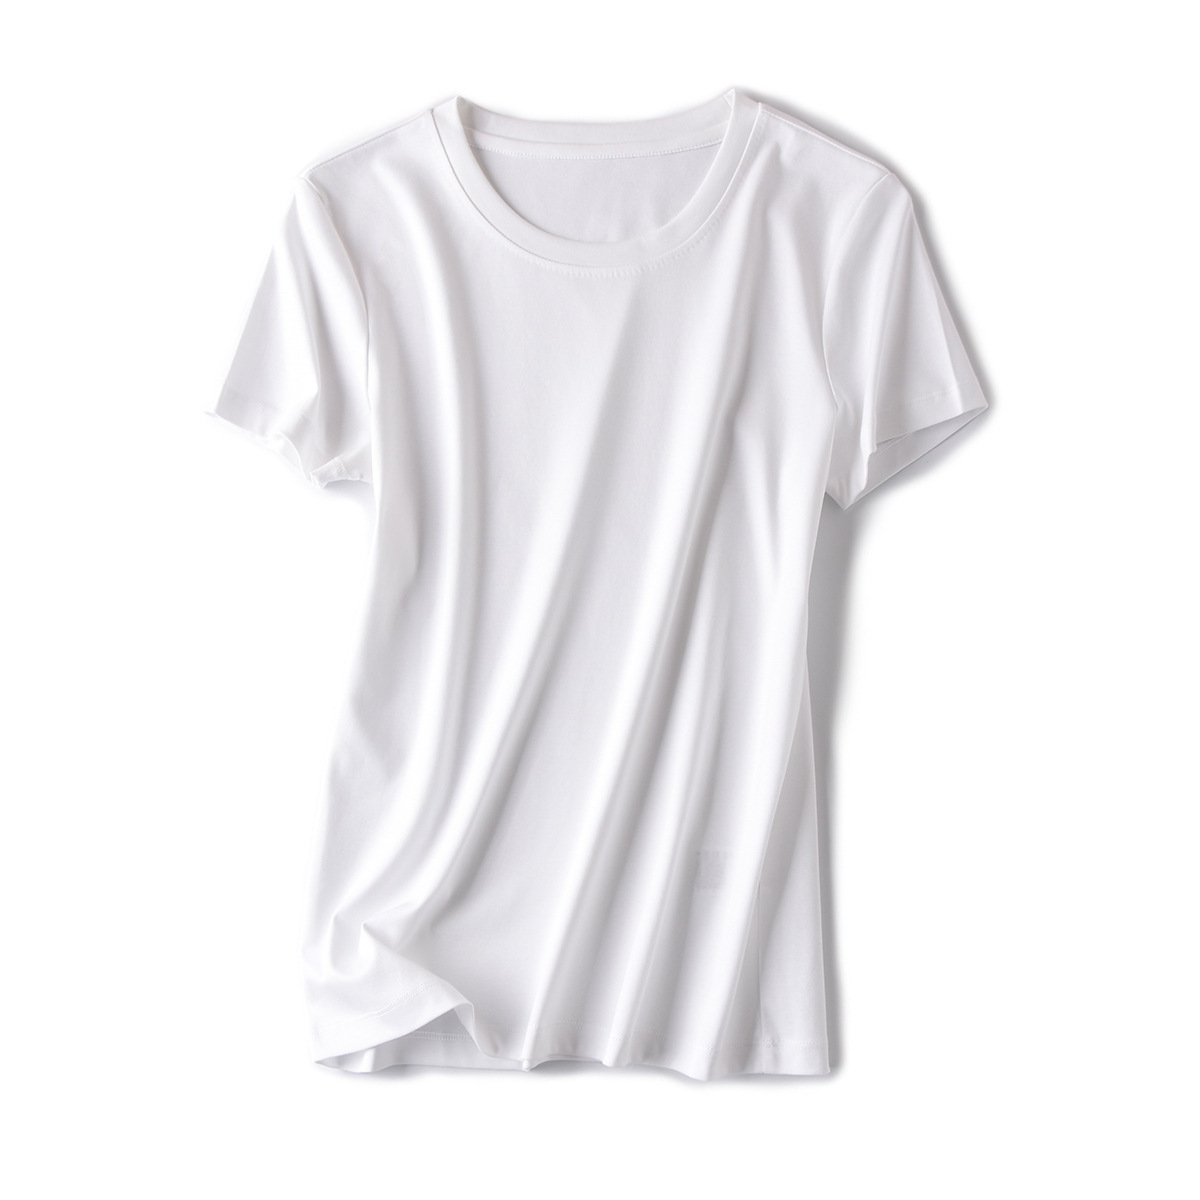 product-Ruiteng-Womens Trendy Wear Modal Fiber Stretchy Icy T-shirt-img